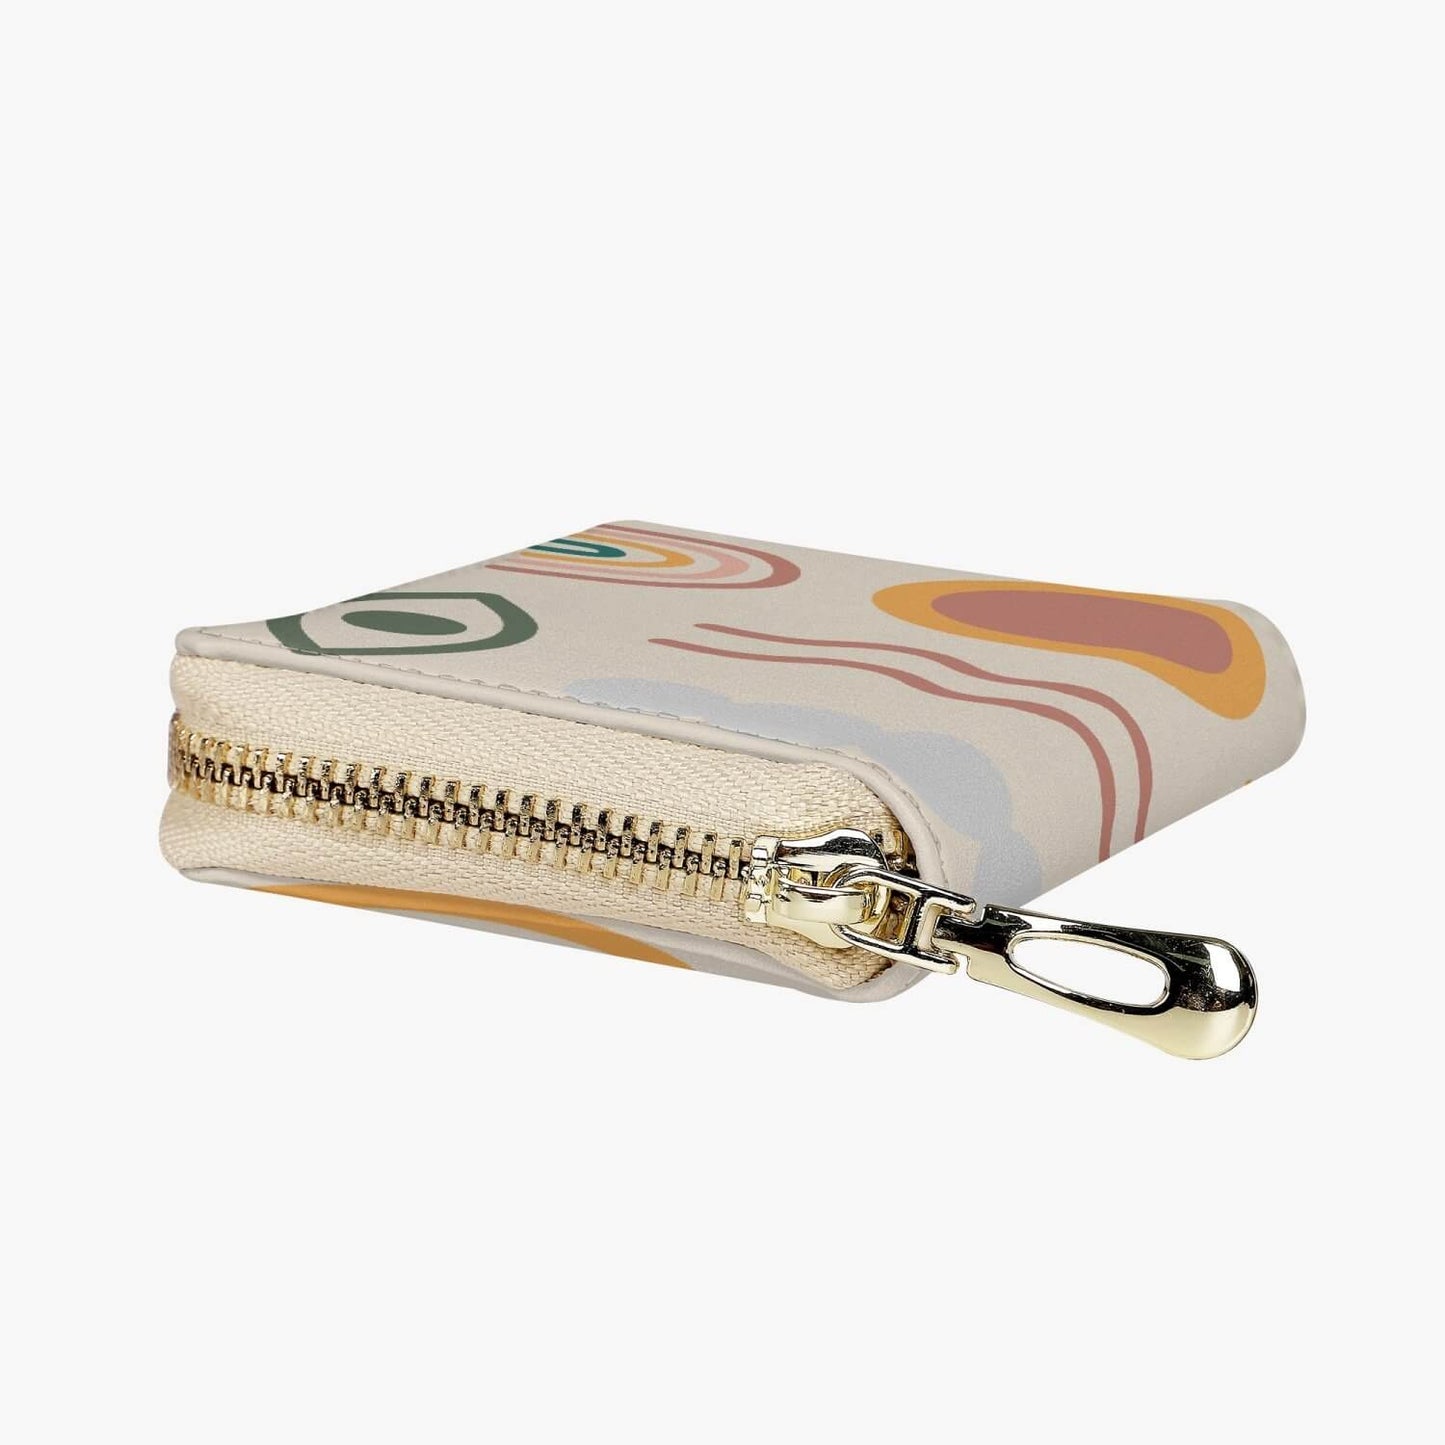 Short Type Zipper Card Holder Print on any thing USA/STOD clothes